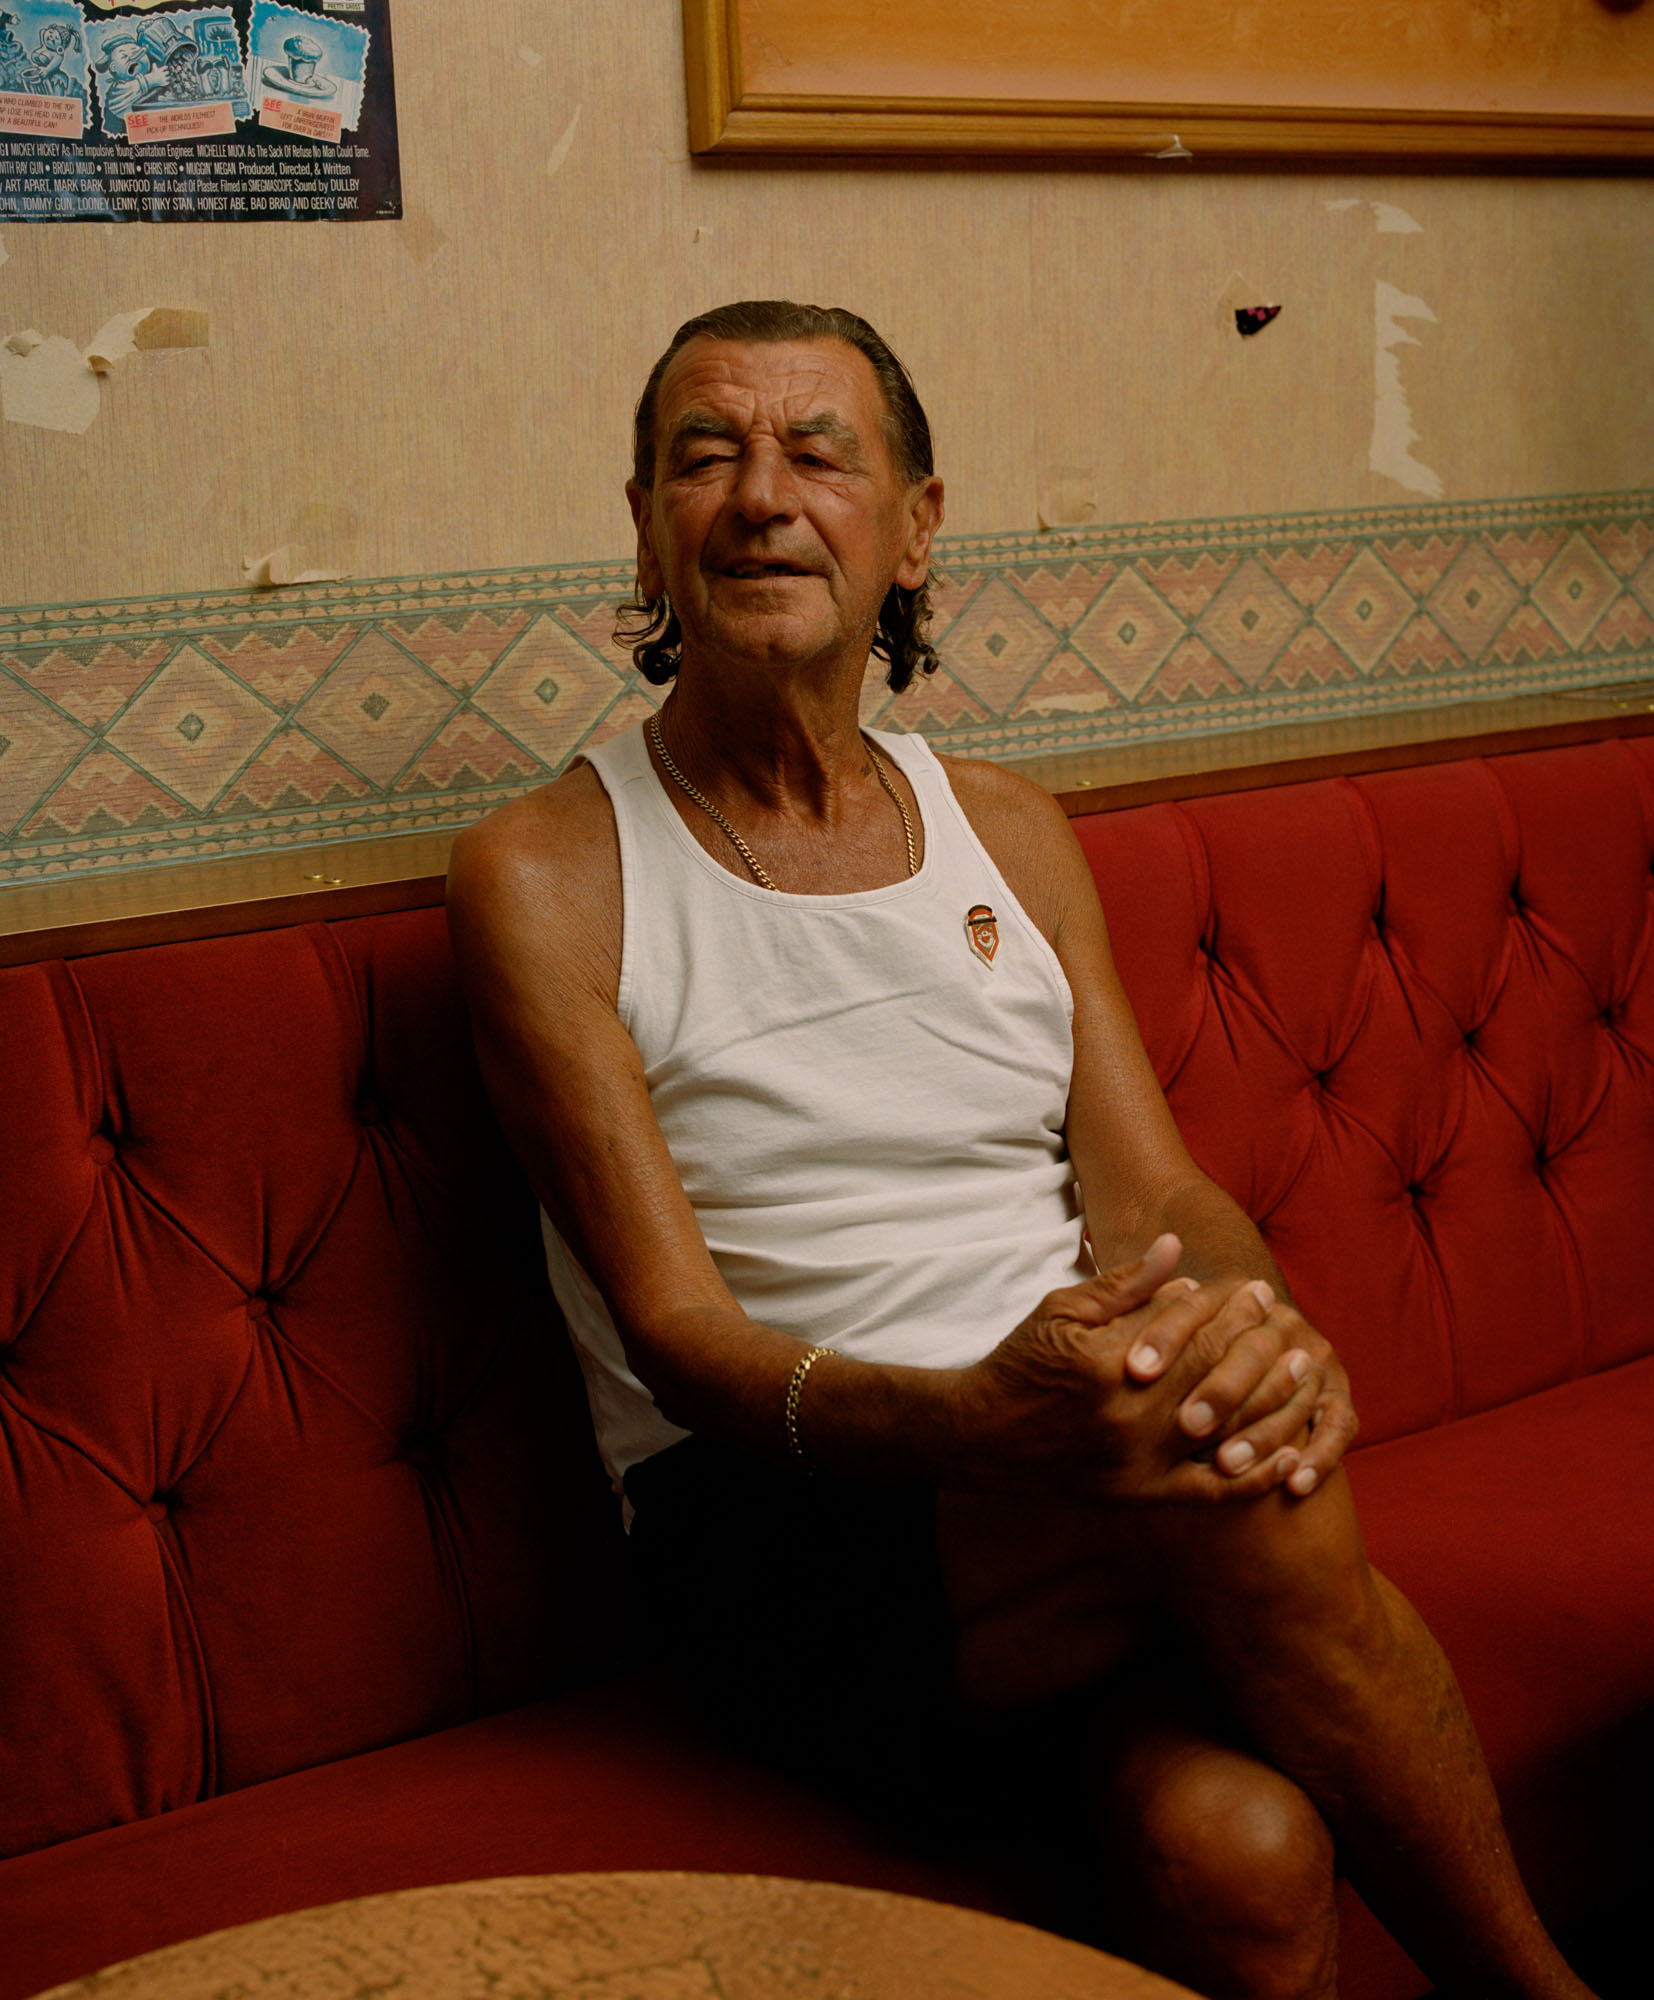 Person wearing a white tank top gold chain bracelet and necklace sits on red booth seating at a men's working club. There is patterned wallpaper behind them.